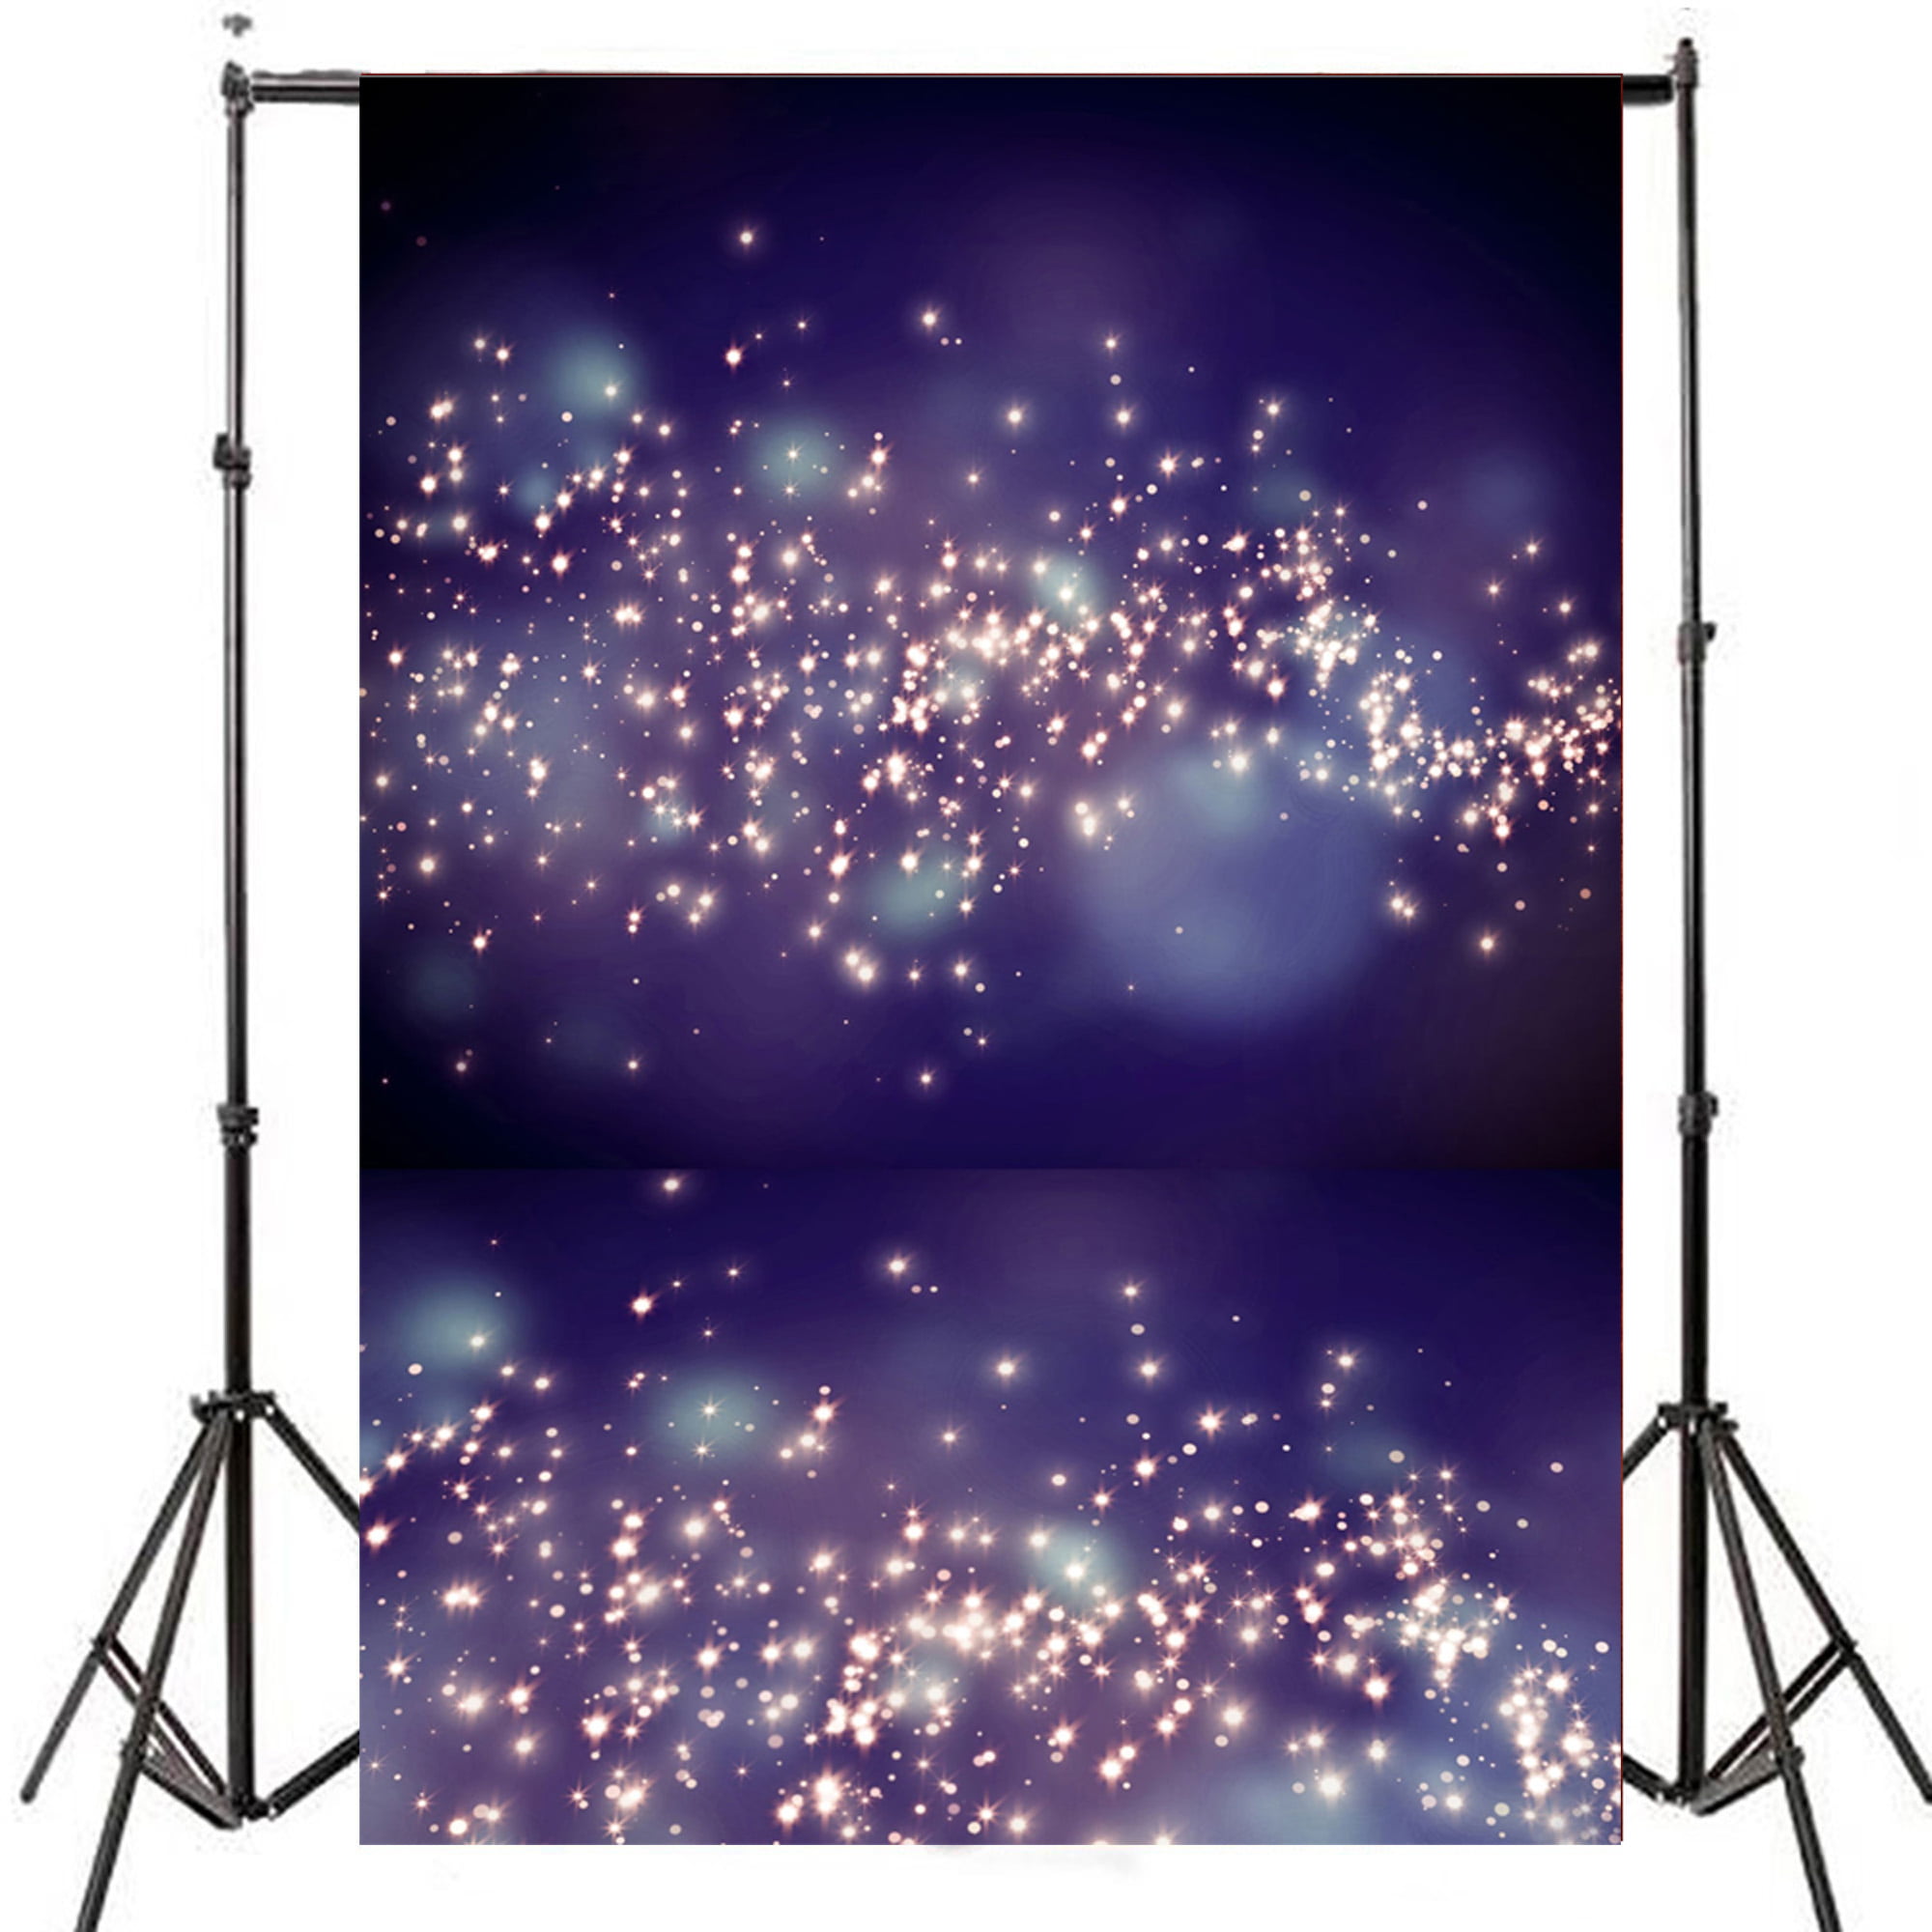 YongFoto 10x9ft Glitter Halos Bokeh Wood Floor Backdrop Party Stage Decoration Background for Photography New Year Birthday Party Banner Kids Adult Portrait Photo Studio Props Wallpaper